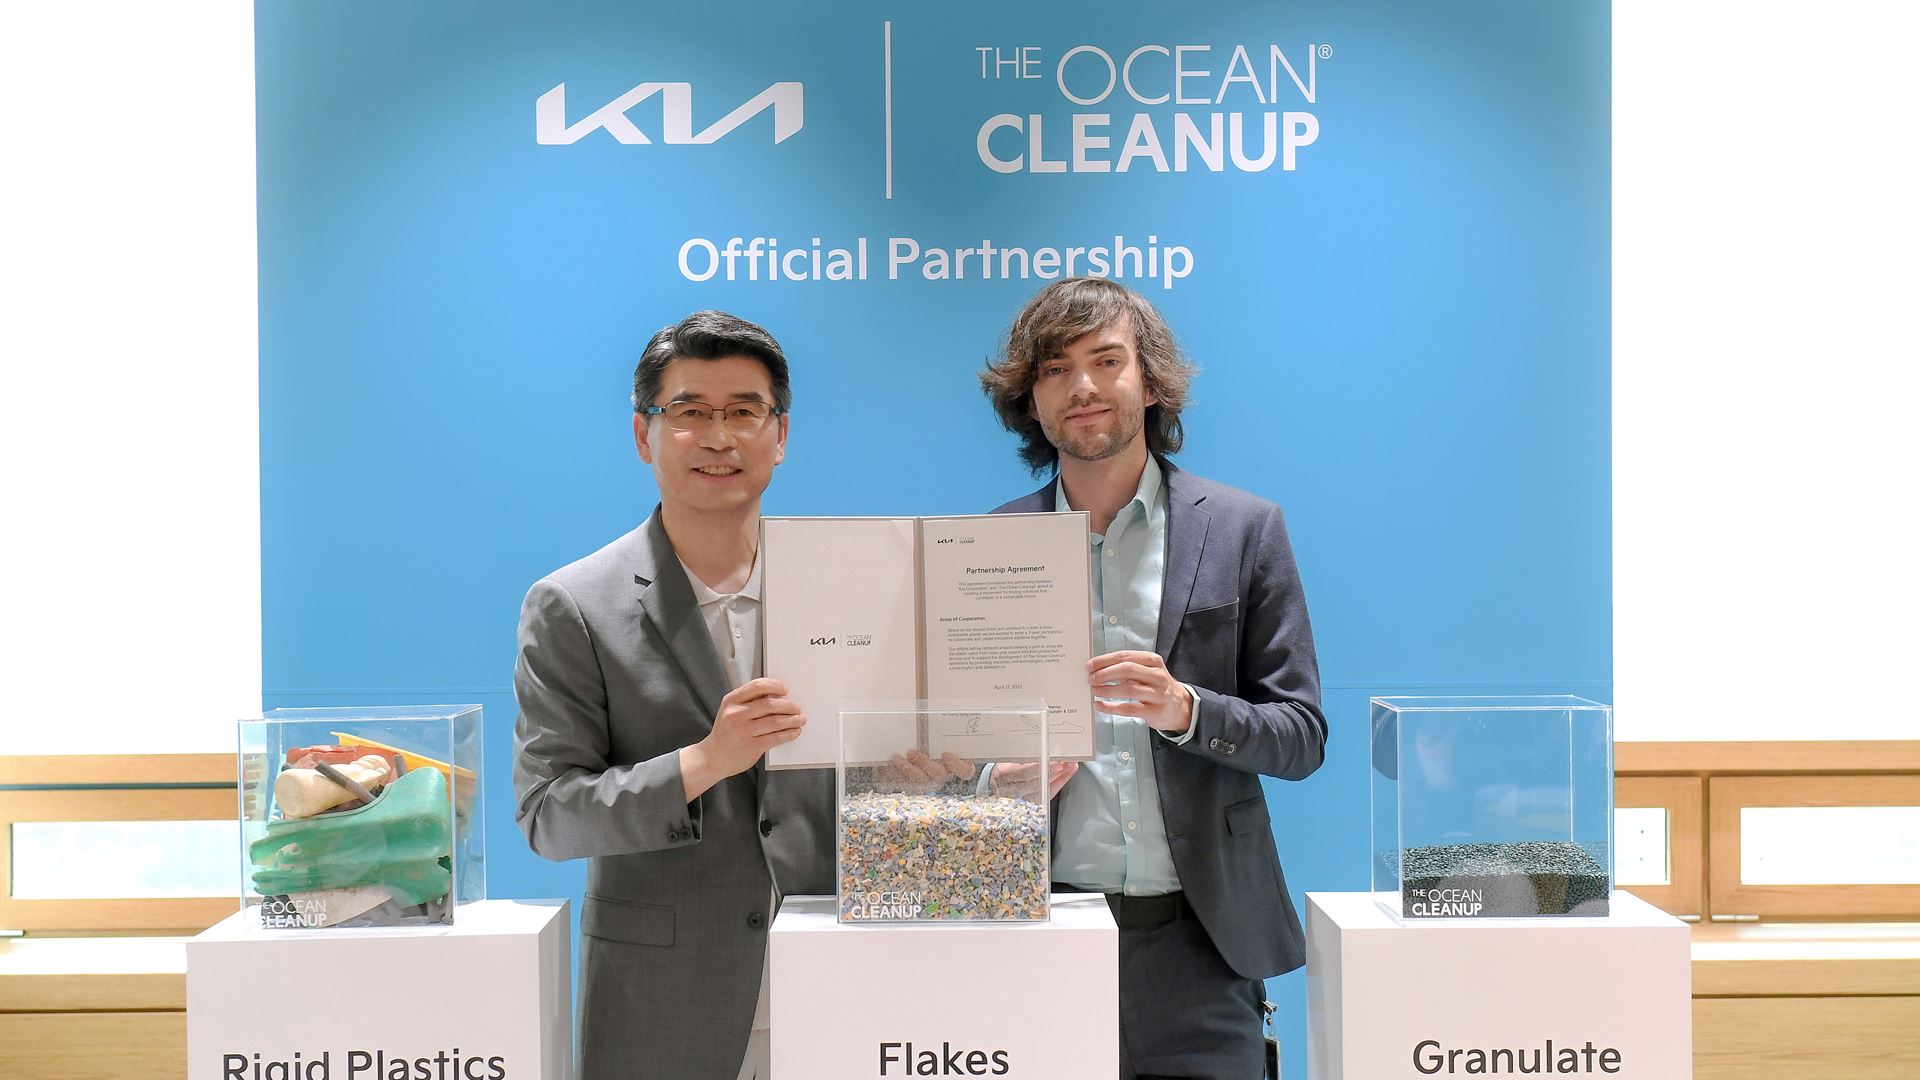 (left) Ho Sung Song, President & CEO, Kia Corporation (right) Boyan Slat, Founder & CEO, The Ocean Cleanup